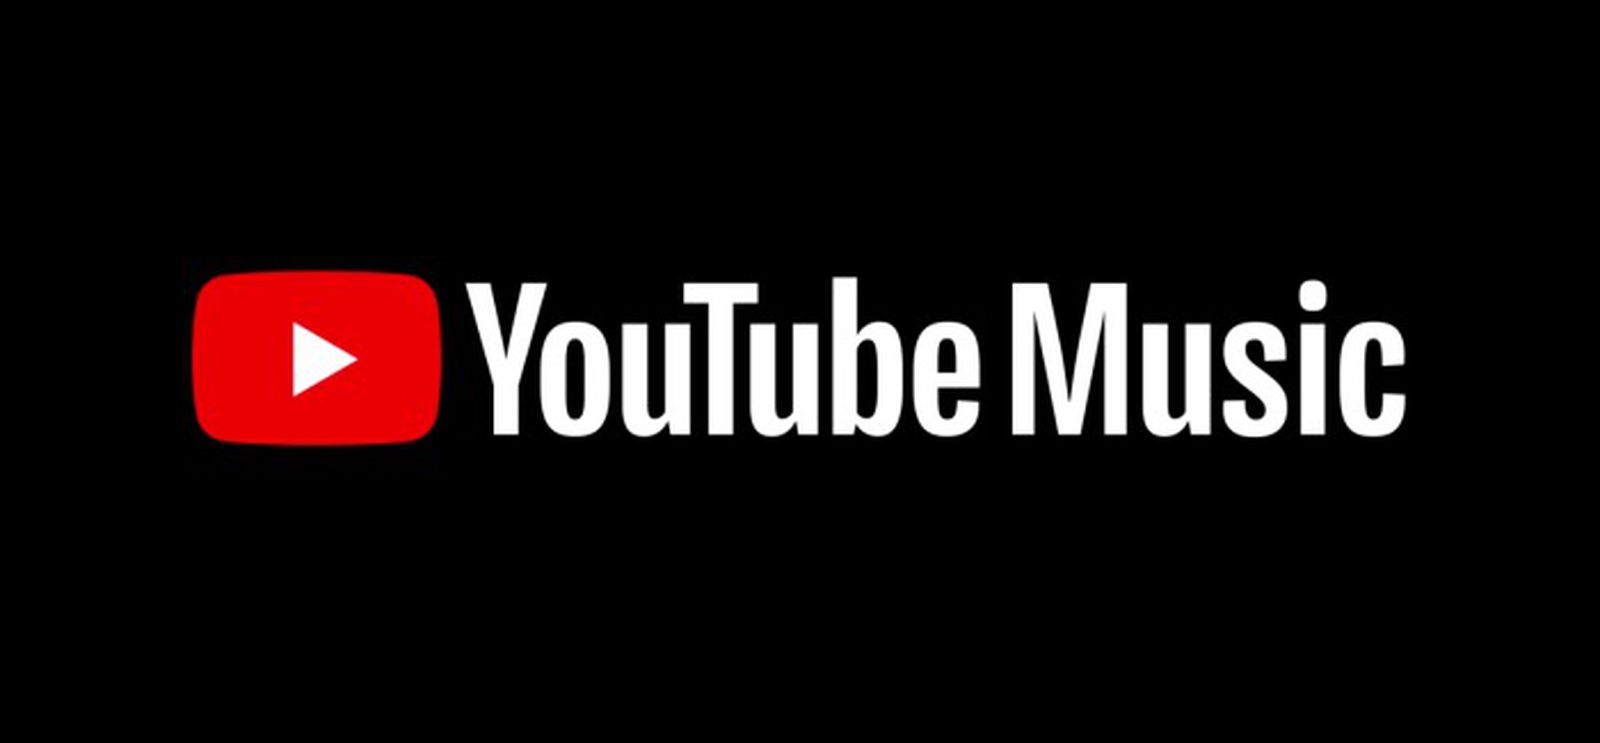 can you download music from youtube music to your computer